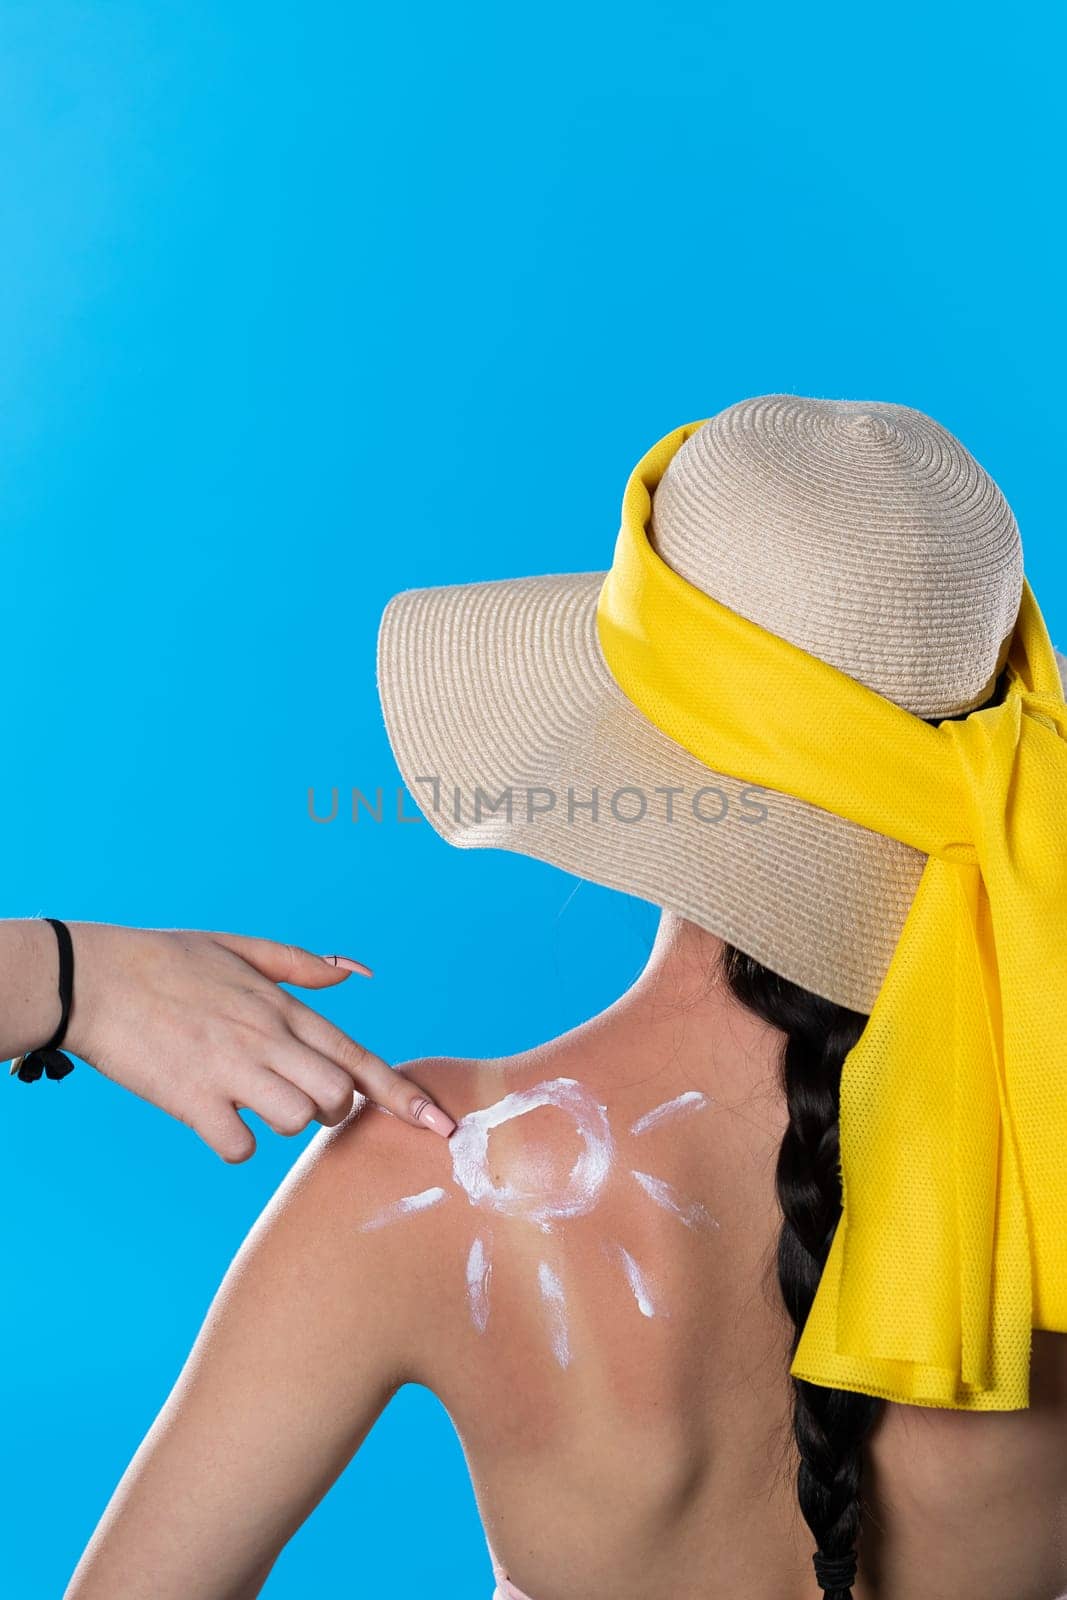 When spreading cream on her back, a friend makes a finger drawing on the patch and shoulder.